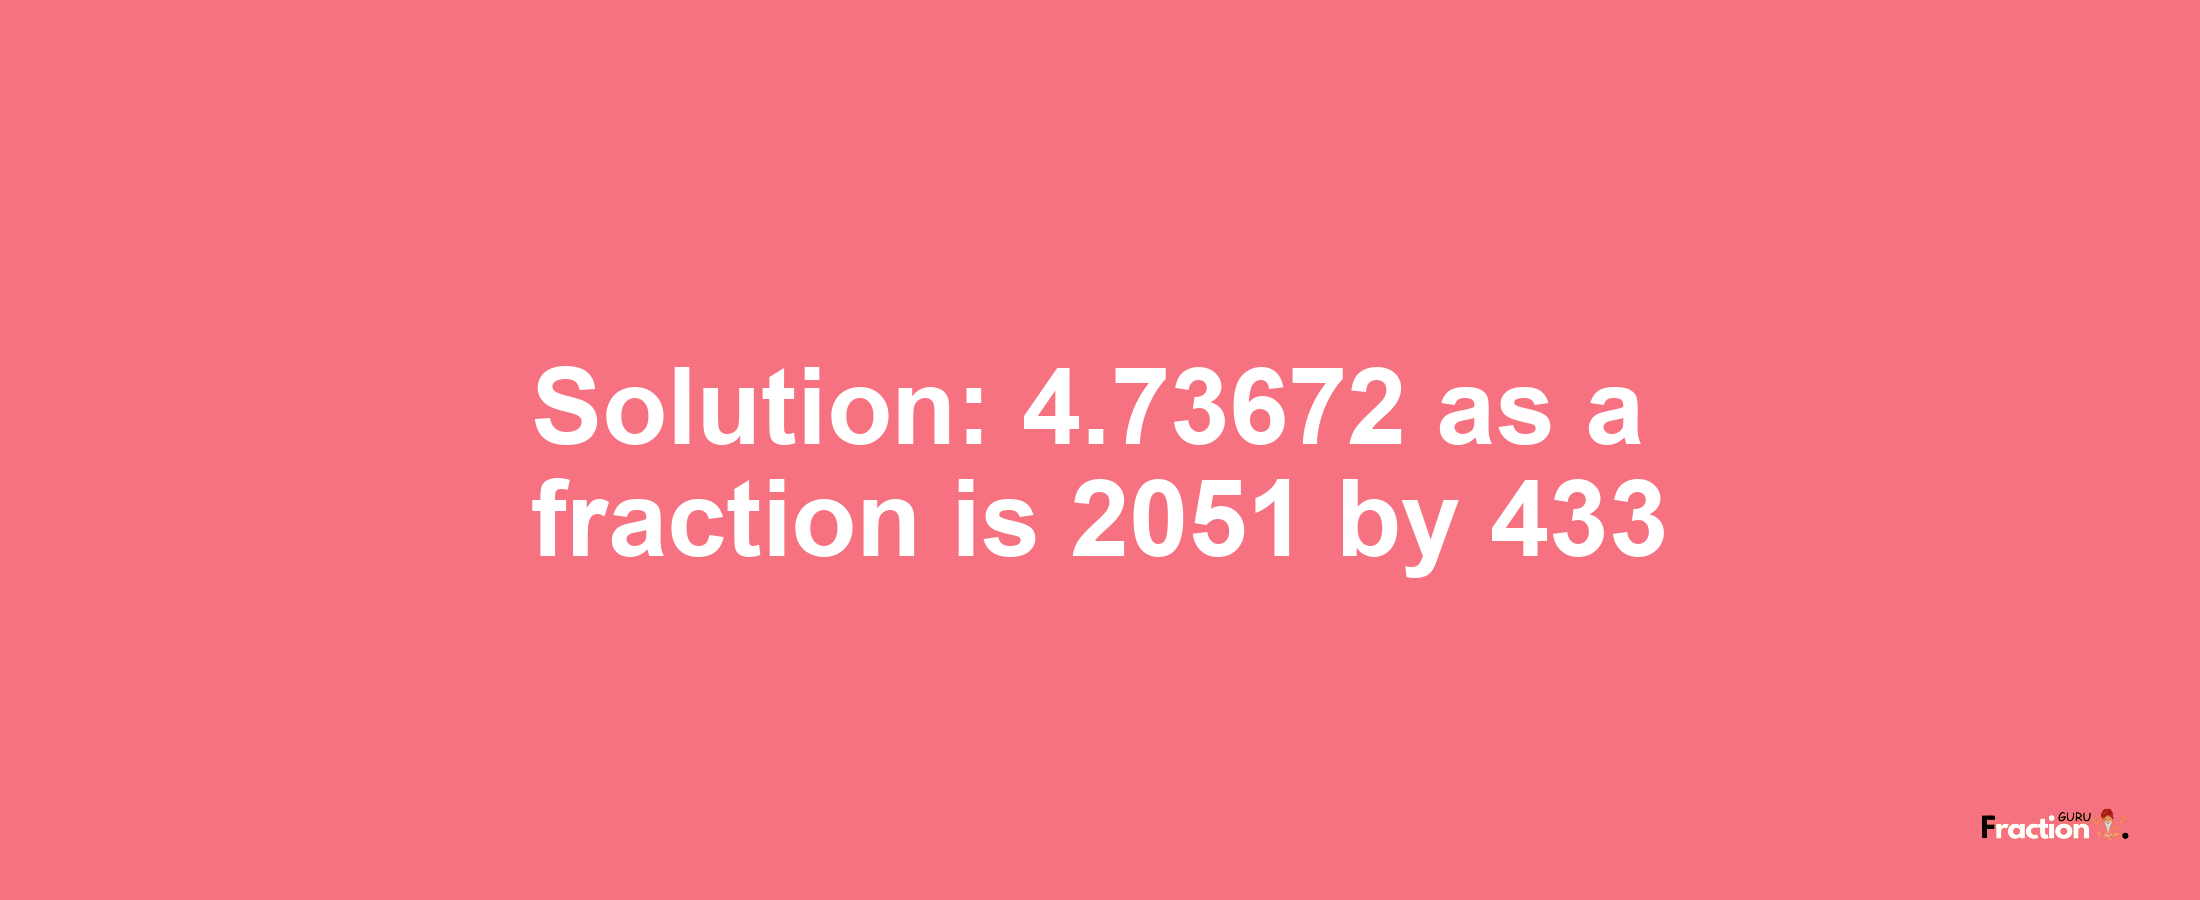 Solution:4.73672 as a fraction is 2051/433